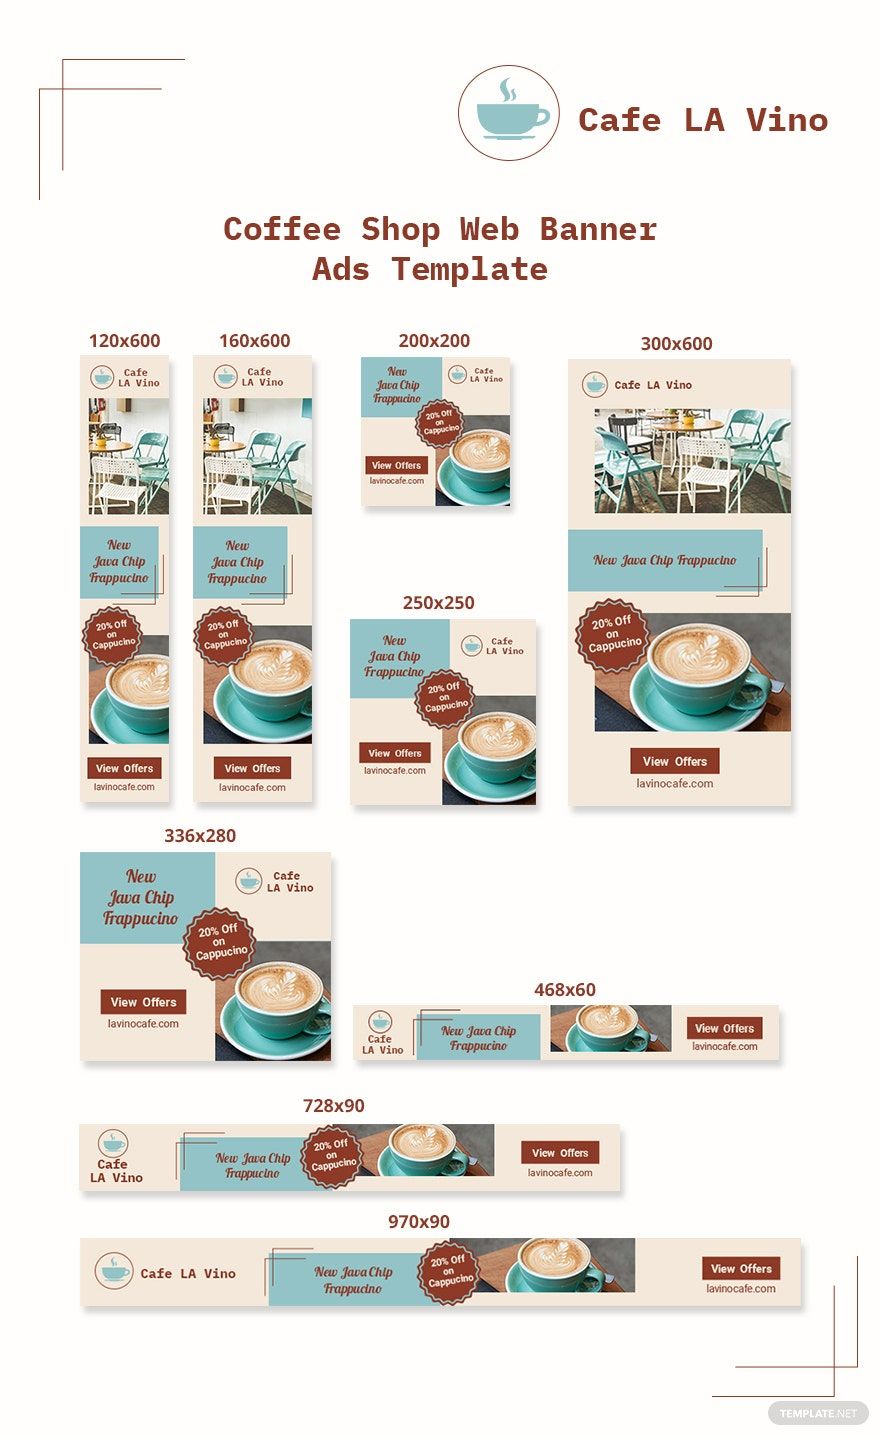 Coffee Shop Web Banner Ads Template